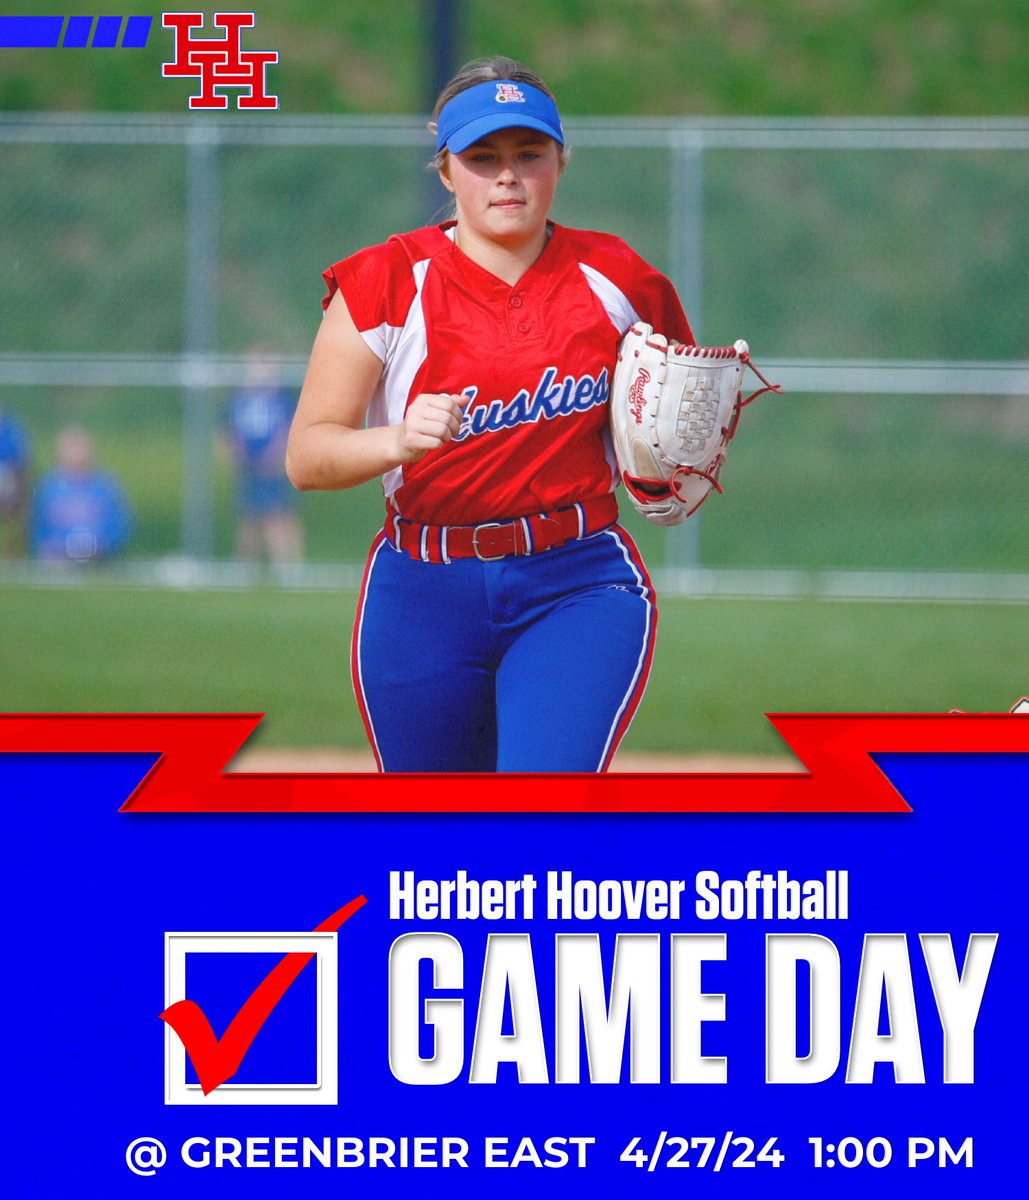 It's GAME DAY for the Herbert Hoover Huskies Softball Team as they travel to Greenbrier East. First pitch set for 1:00 PM. #TheRiver #GoHuskies #wvprepsb Live feed for today's game. THIS IS THE ONLY LIVE LINK!! facebook.com/GreenbrierVall…